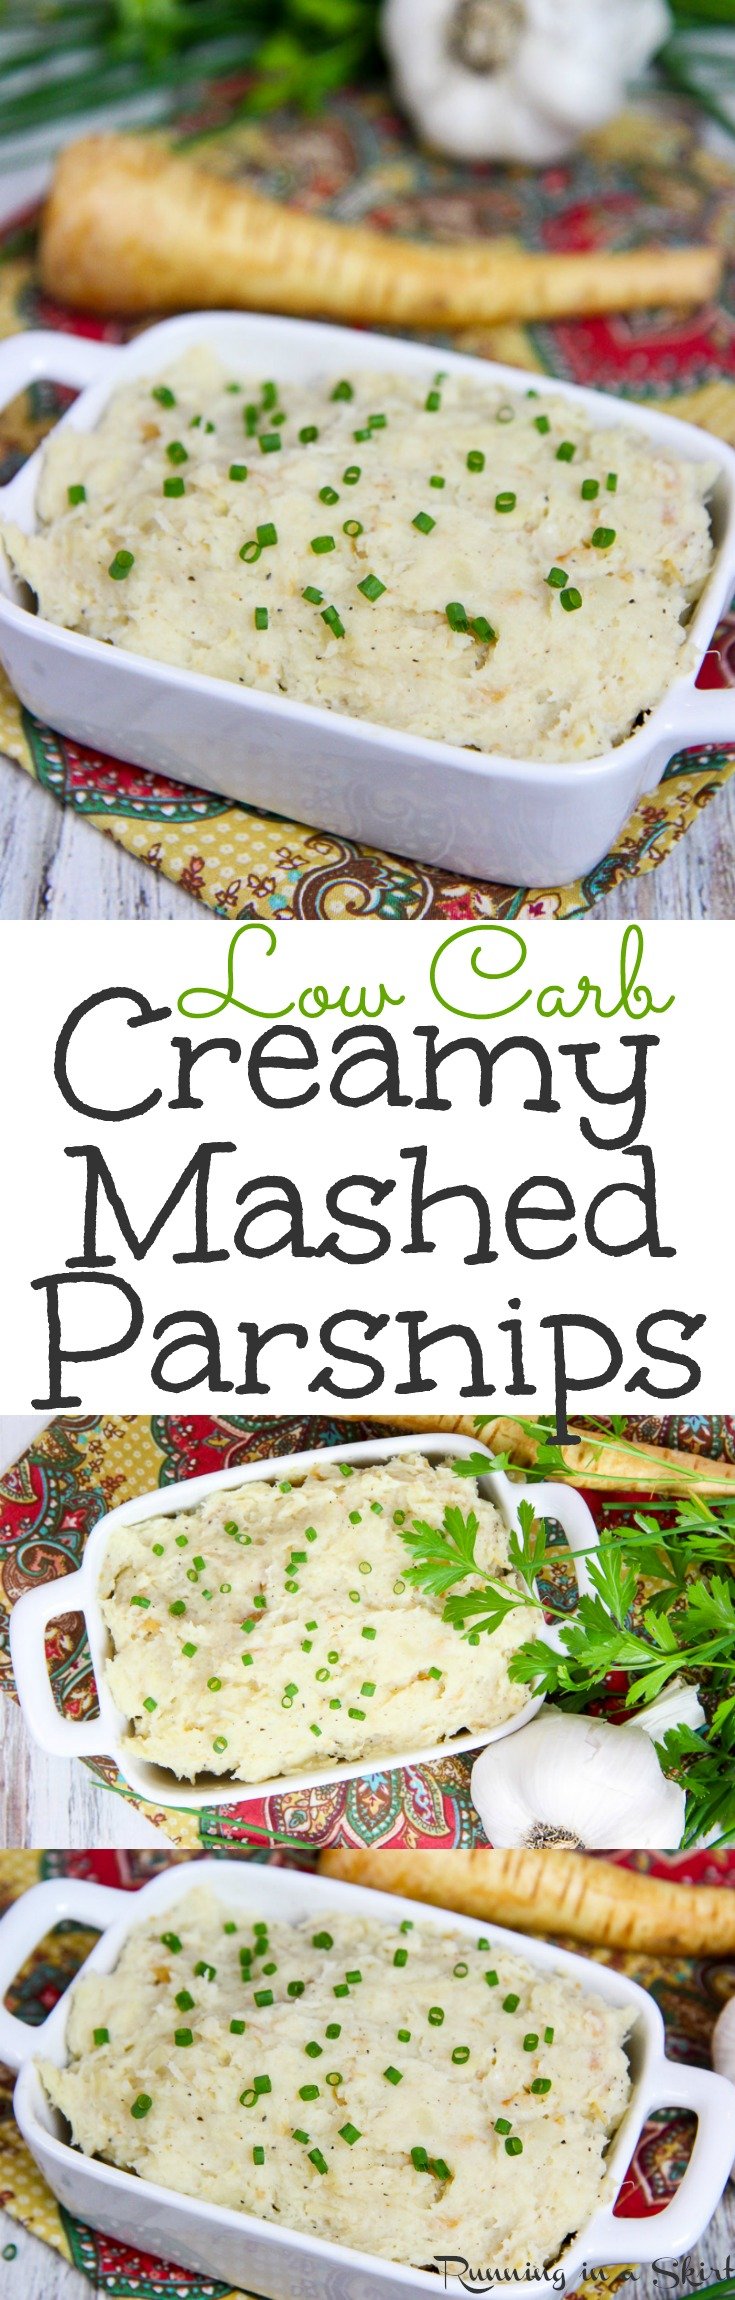 4 Ingredient Low Carb Healthy Mashed Parsnips recipe. A creamy alternative to mashed potatoes for dinners or Thanksgiving. A great use of veggies! Vegetarian & Gluten Free / Running in a Skirt via @juliewunder